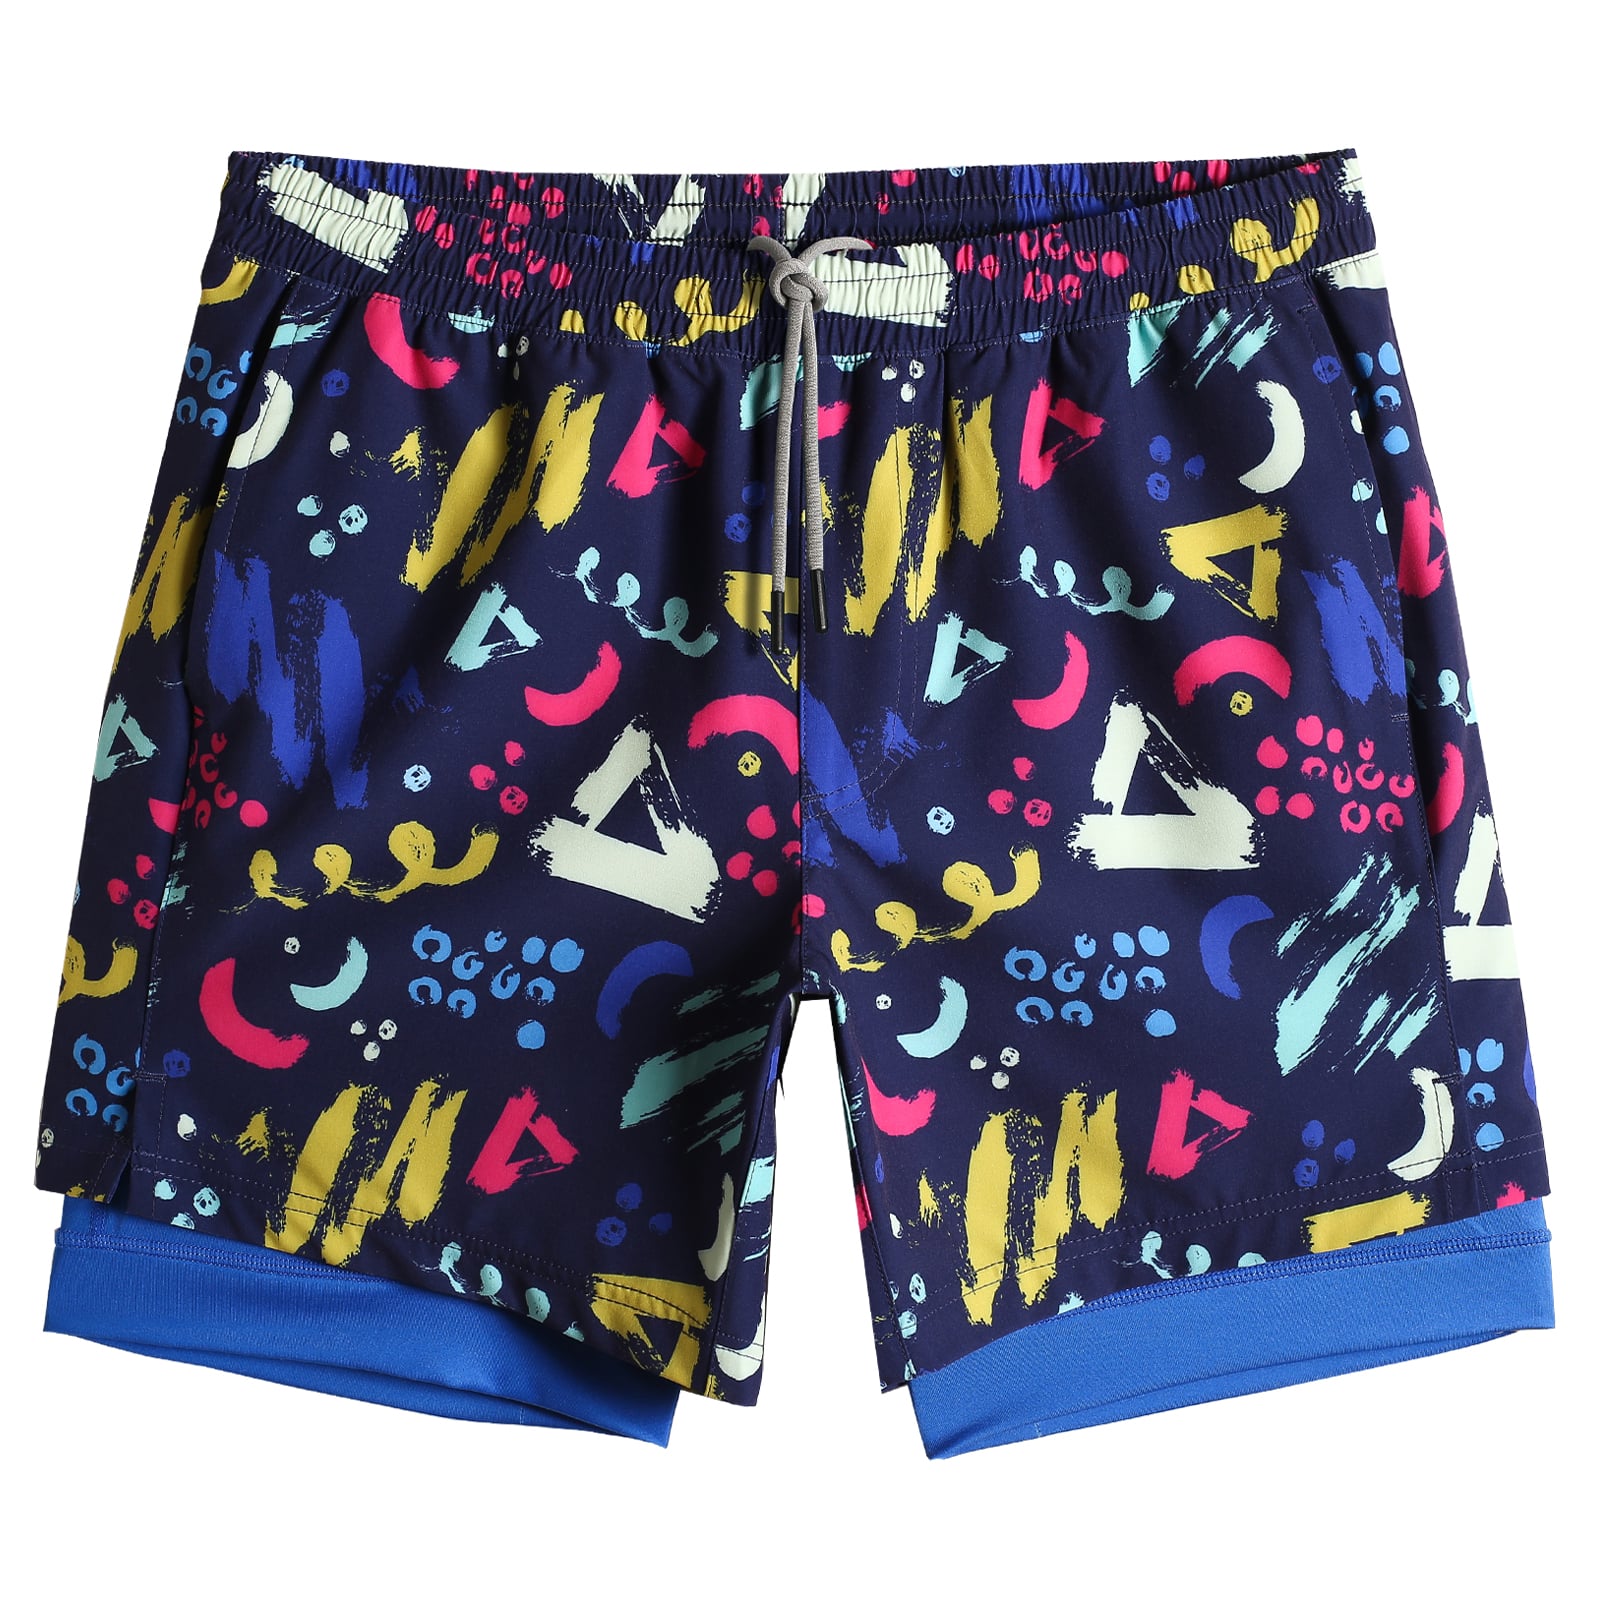 2-in-1 Stretch Long-lined Geometric Doodle Gym Shorts – maamgic